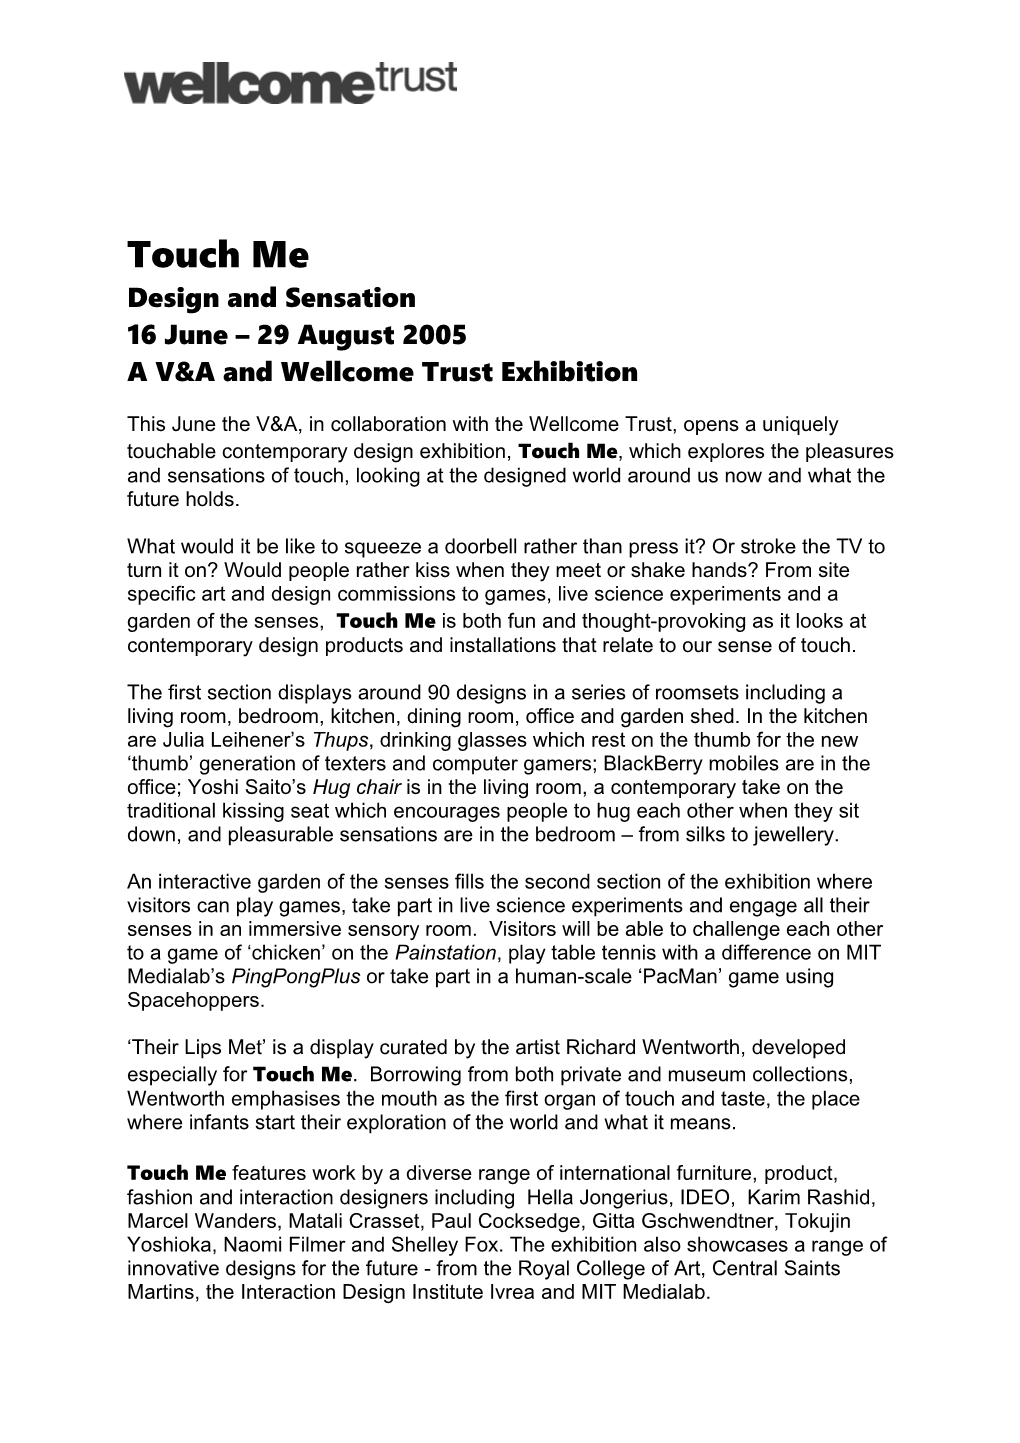 A V&A and Wellcome Trust Exhibition